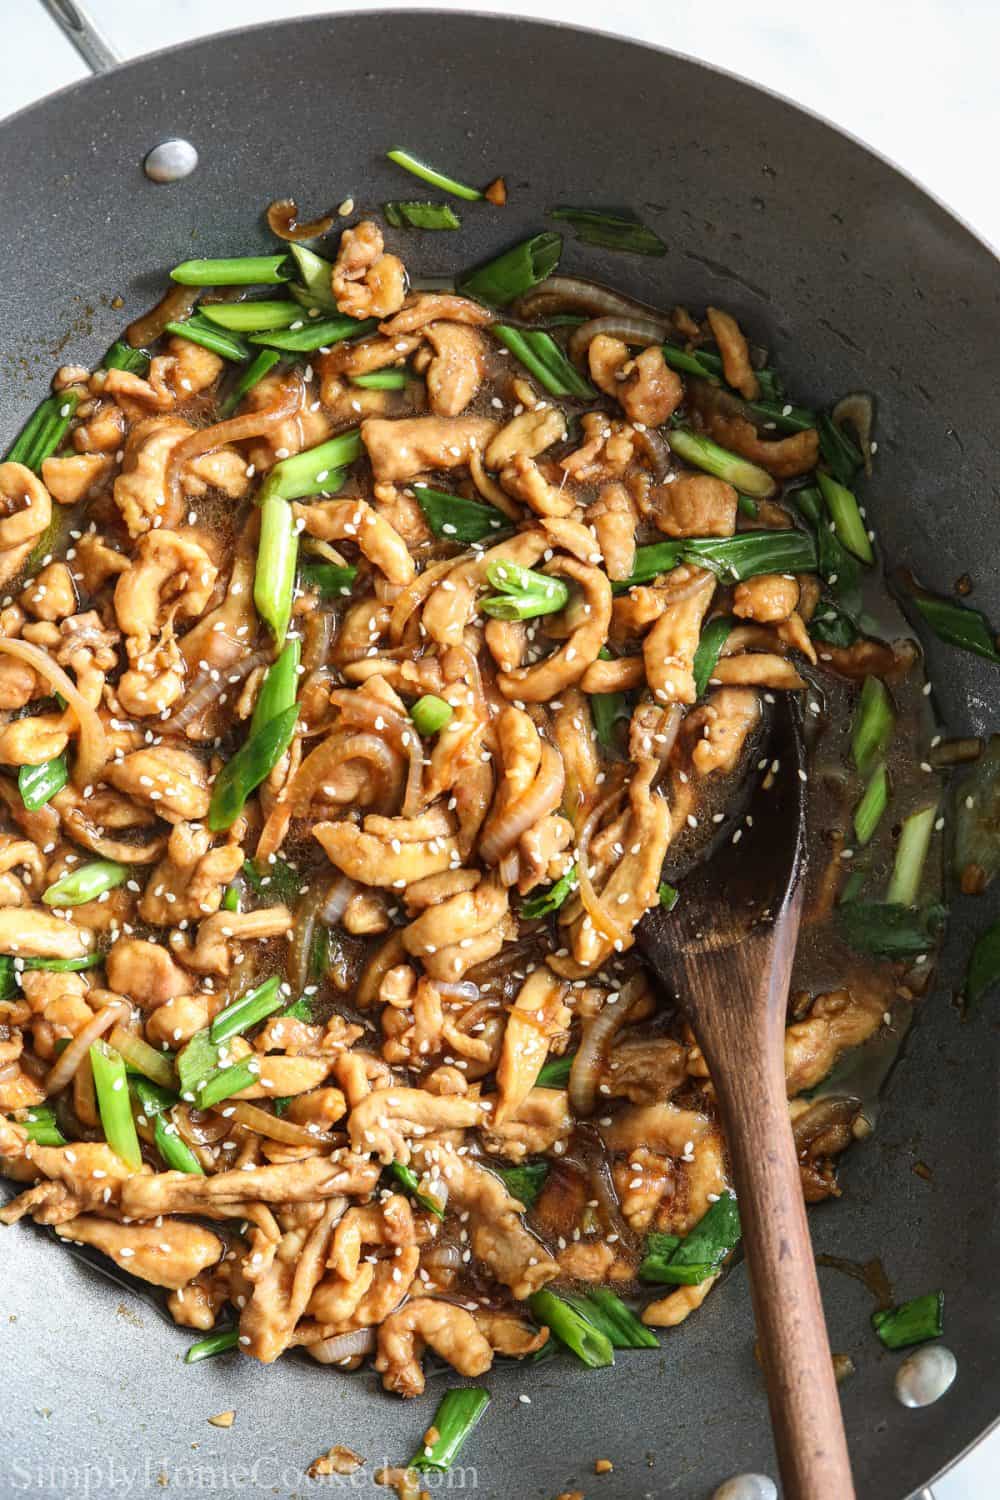 https://simplyhomecooked.com/wp-content/uploads/2020/07/easy-mongolian-chicken-13-scaled.jpg